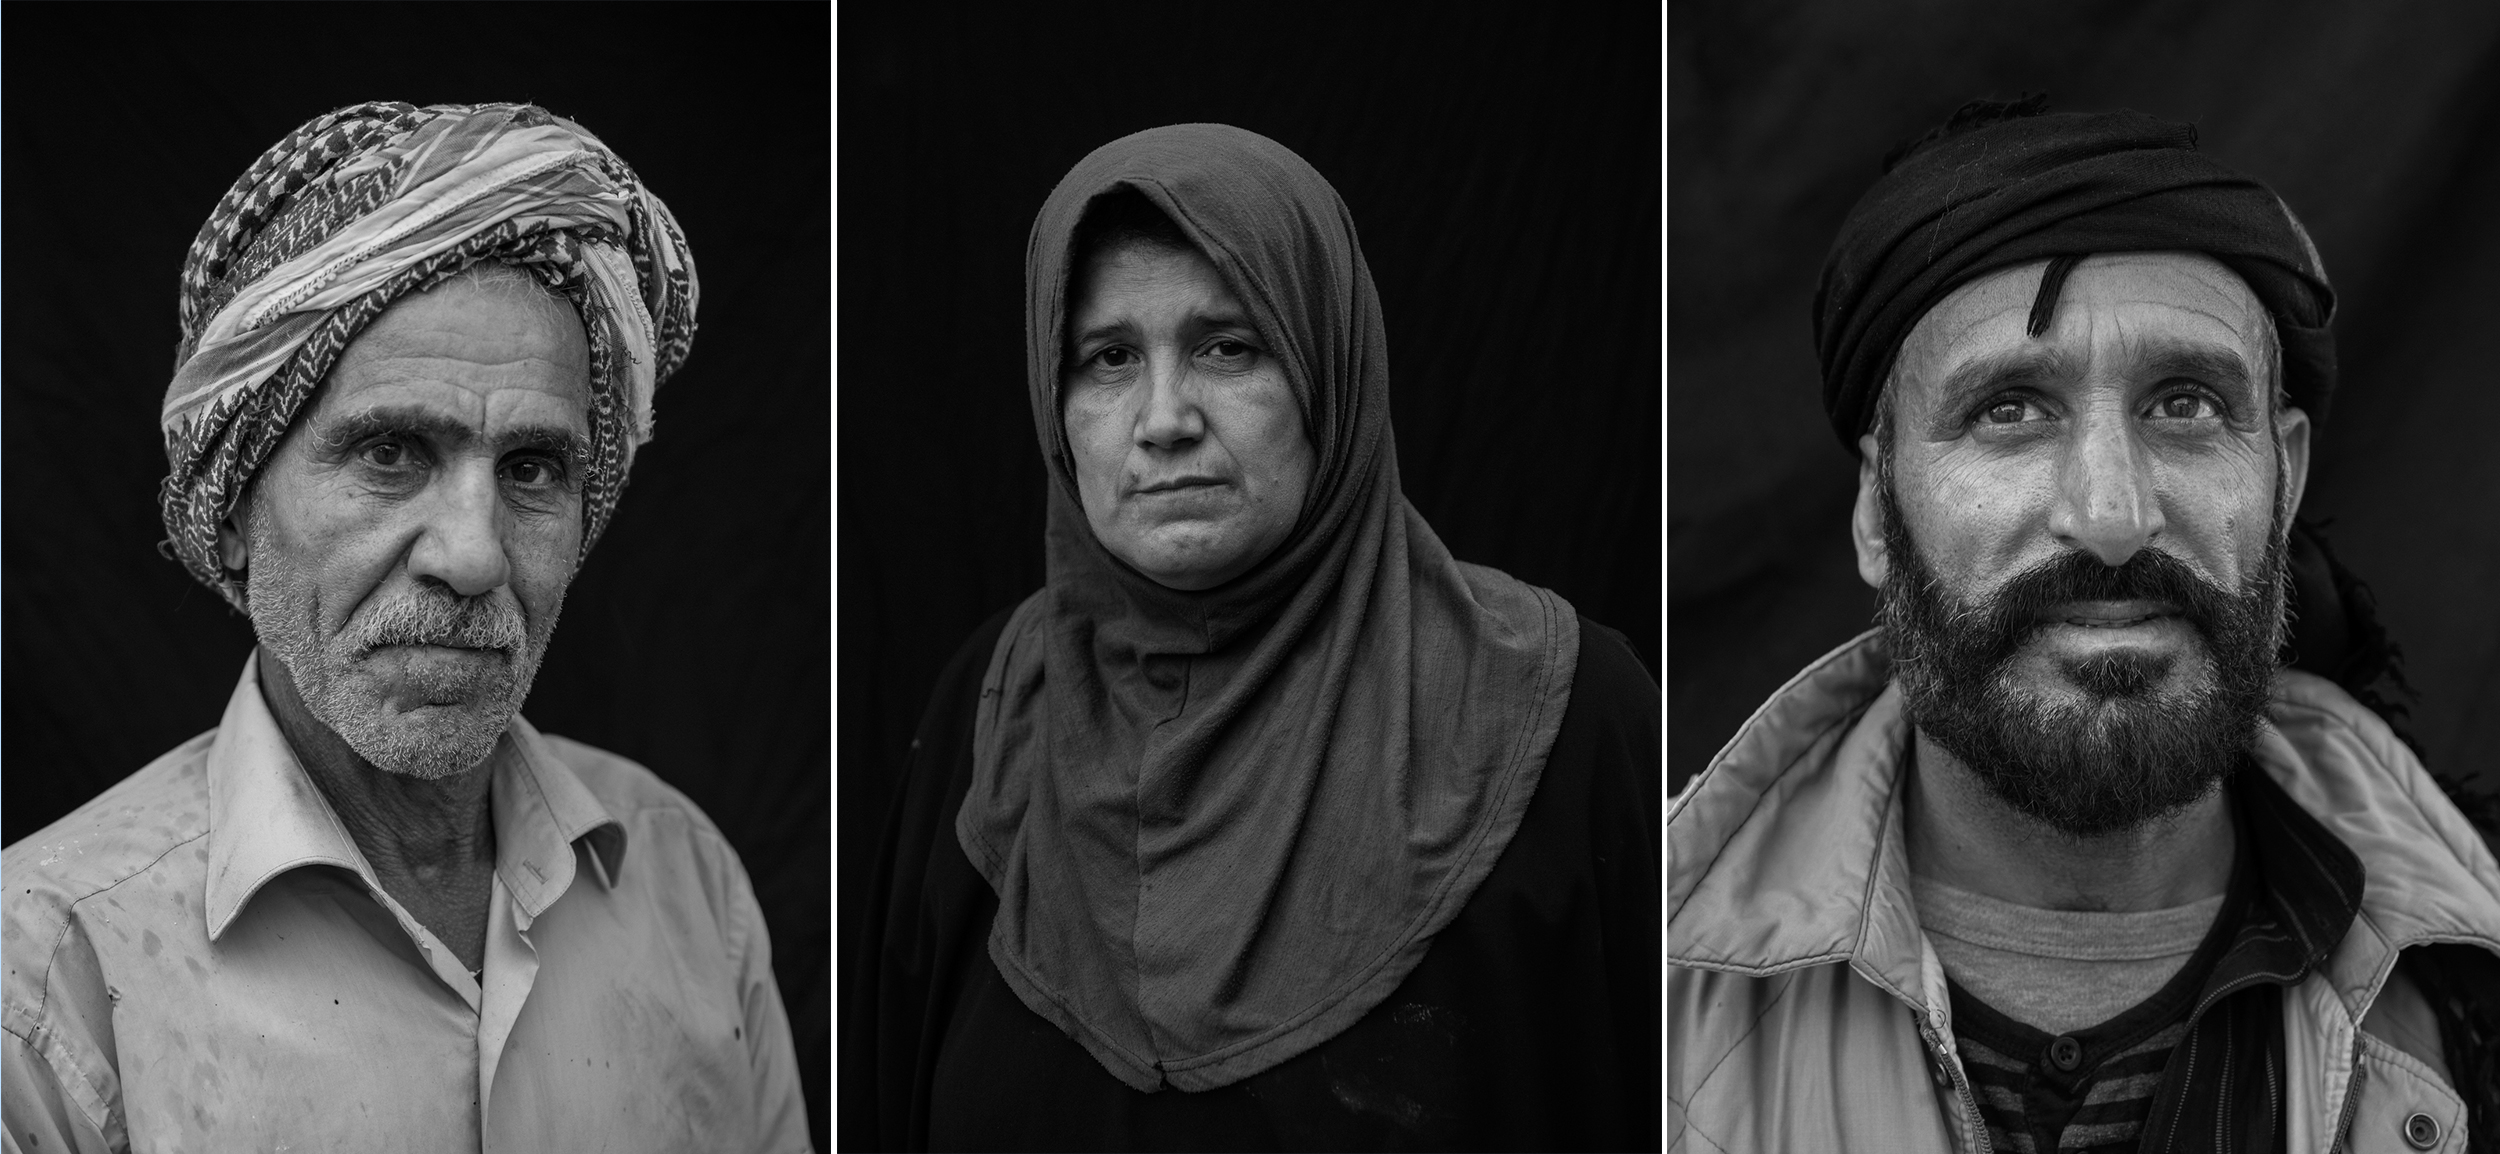 Left: Welder Hussein Ali Mohammed, 63. Four of his six children were killed in the battle against ISIS. Middle: Wafa Thanoon, 51, a religious teacher, who was injured by blasts on three different occasions. Right: Abdullah Hamud, 42, lives in an abandoned apartment with his family in Raqqa. Hamud fled to Raqqa six months ago to look for work after his home in Kasra was destroyed by an airstrike. (Victor J. Blue)